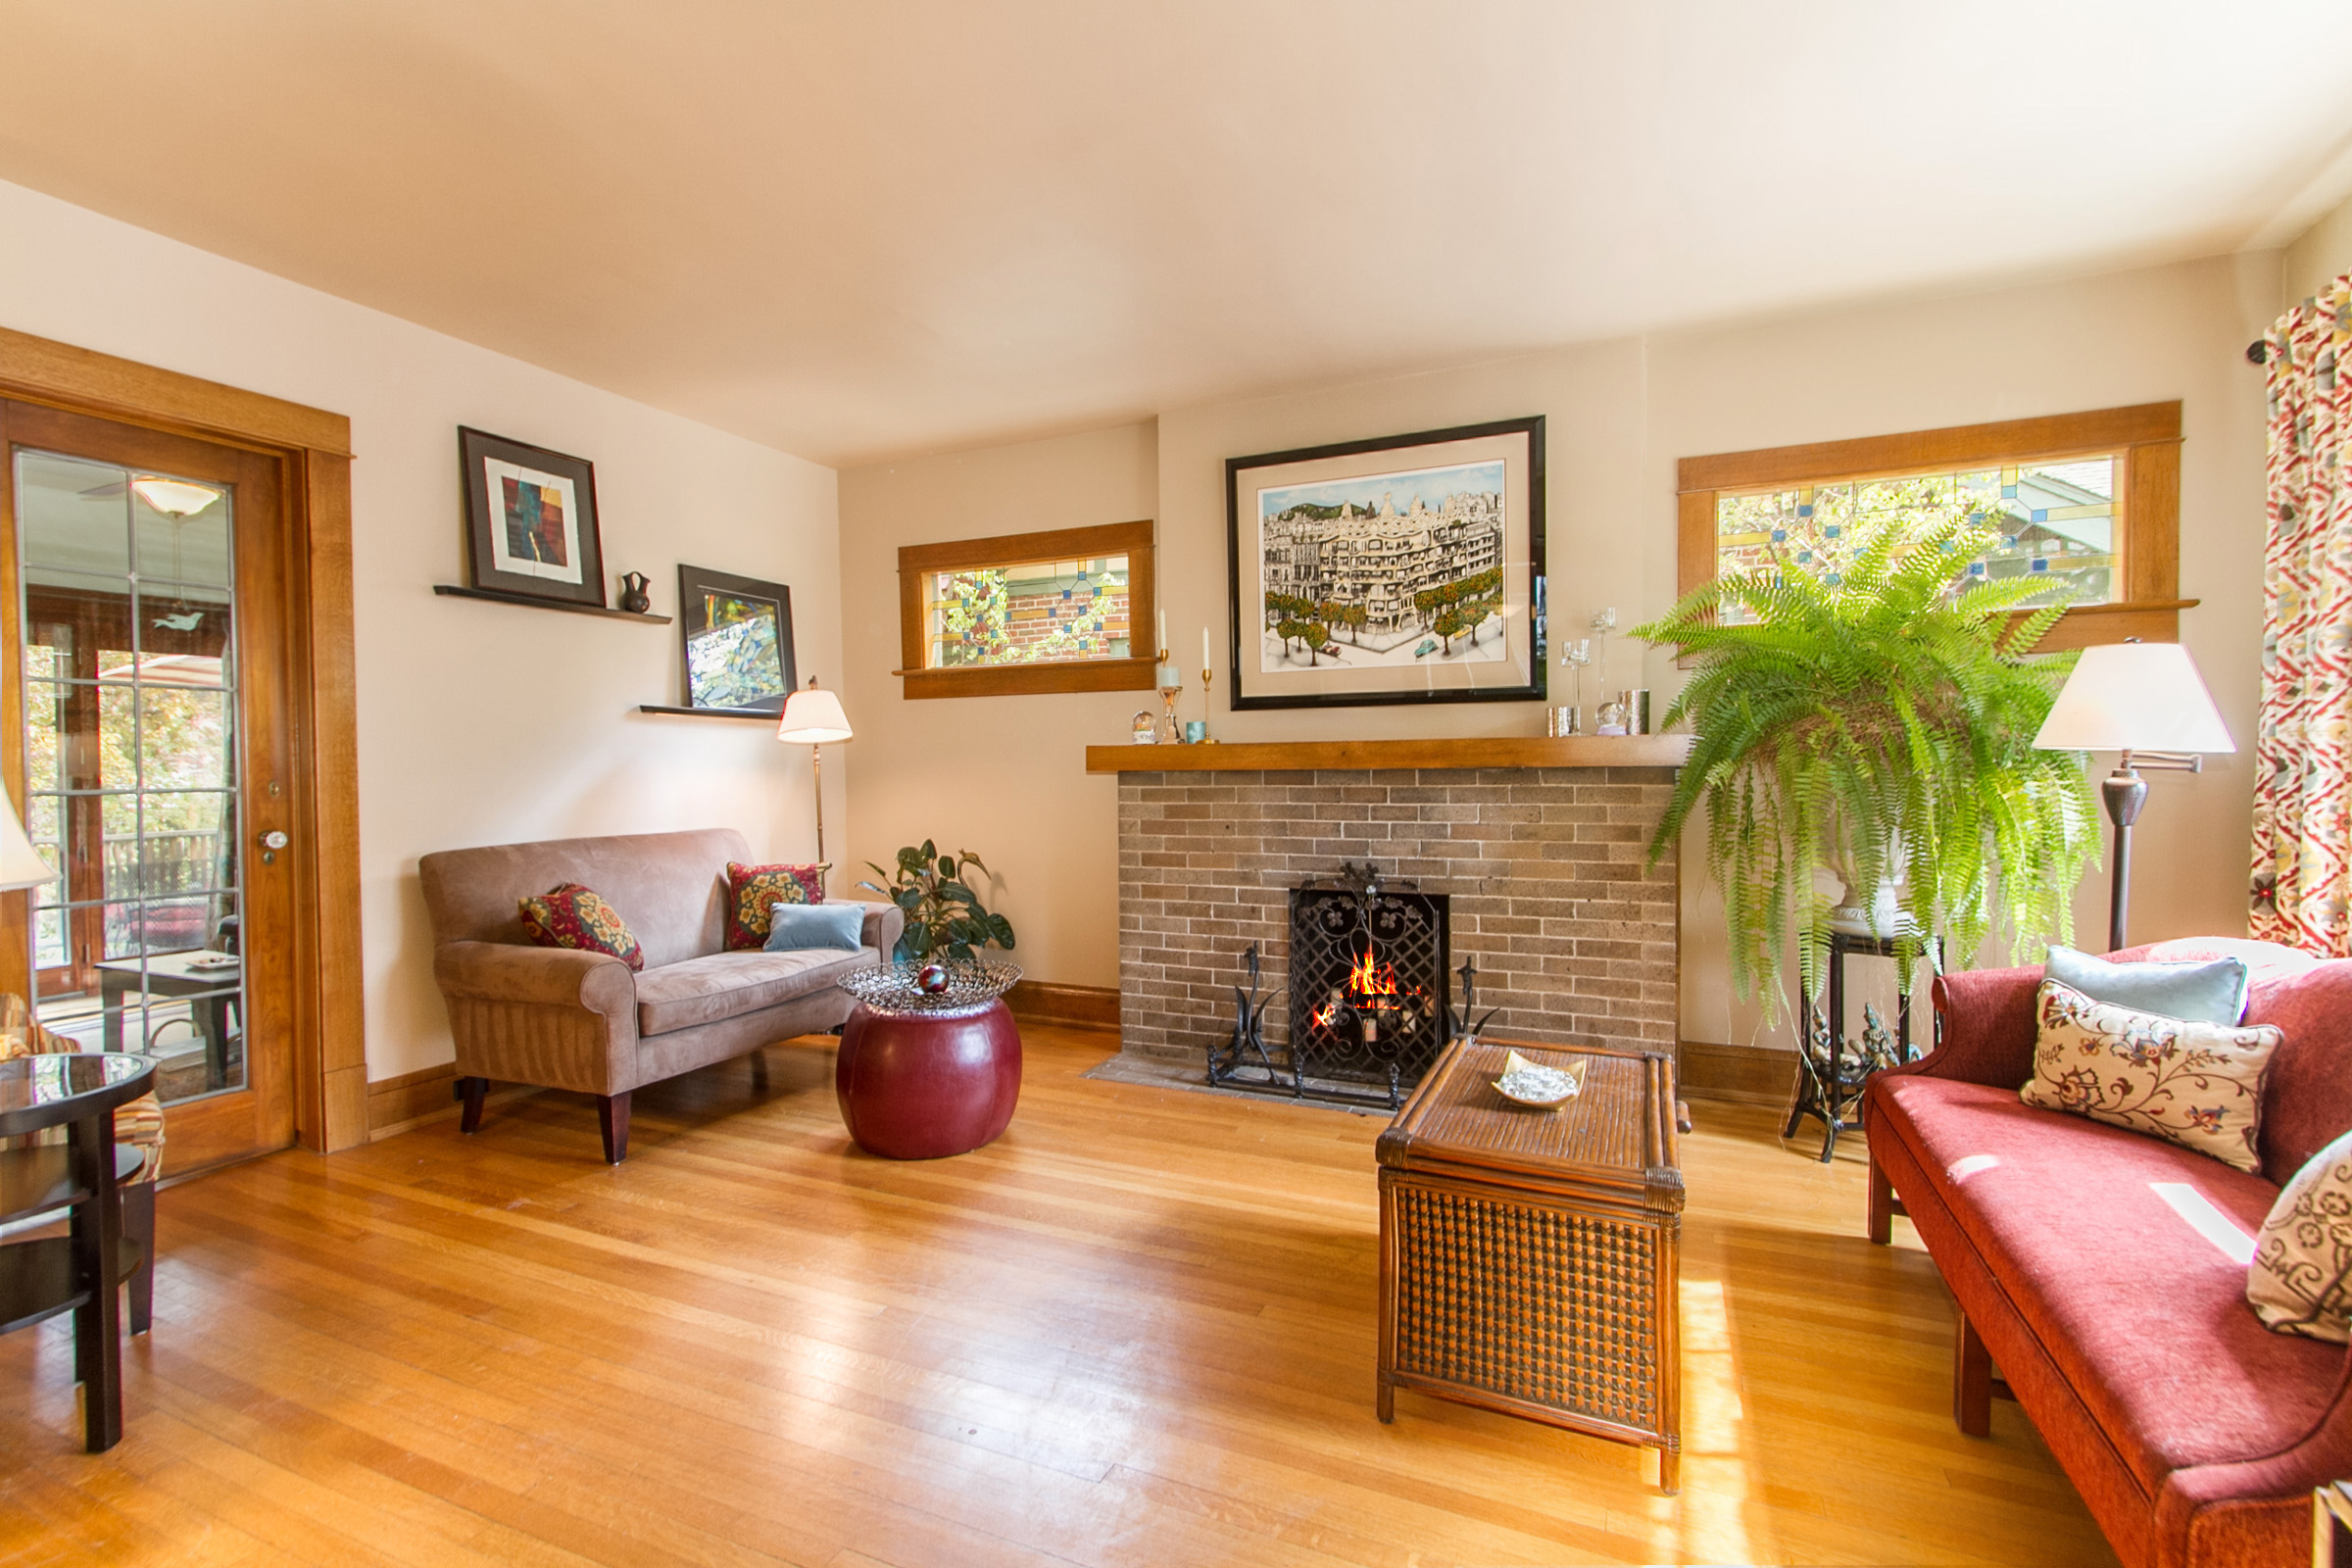 1246129_Living-Room-With-Vintage-Fireplace_high.jpg